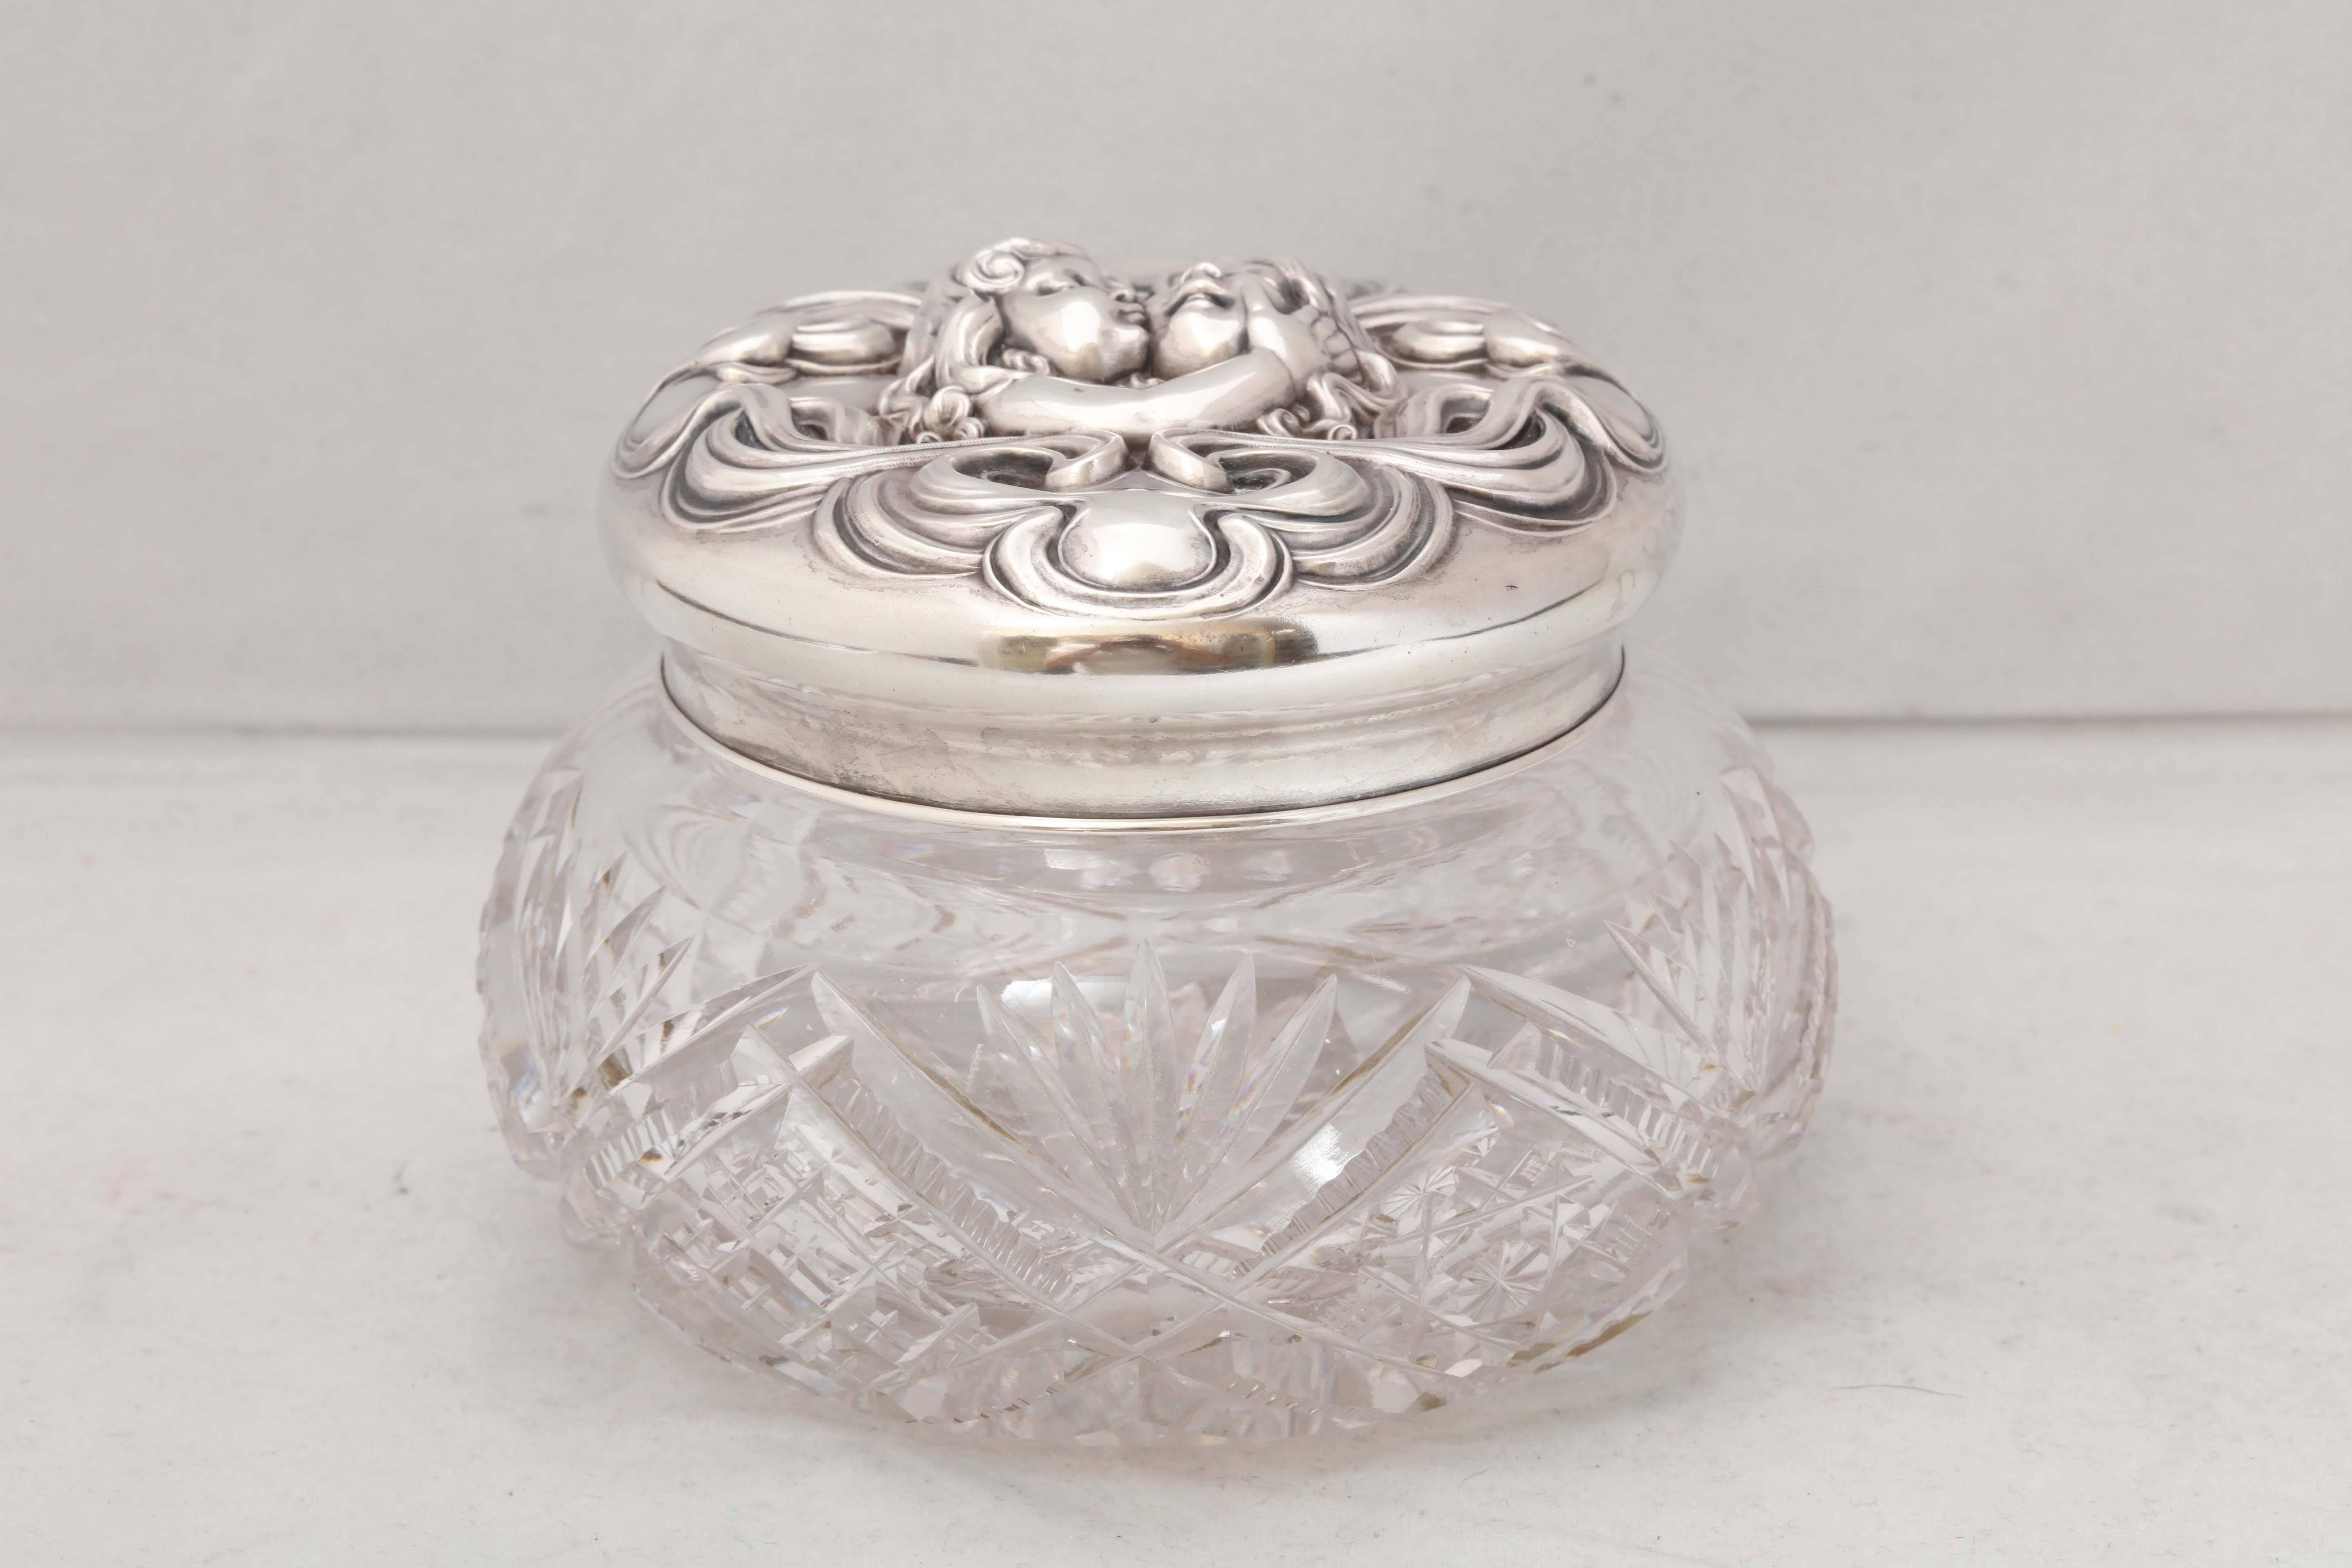 Fabulous, rare, very large, Art Nouveau, sterling silver-mounted cut crystal powder jar, Unger Bros. Co., New Jersey, circa 1895. The 